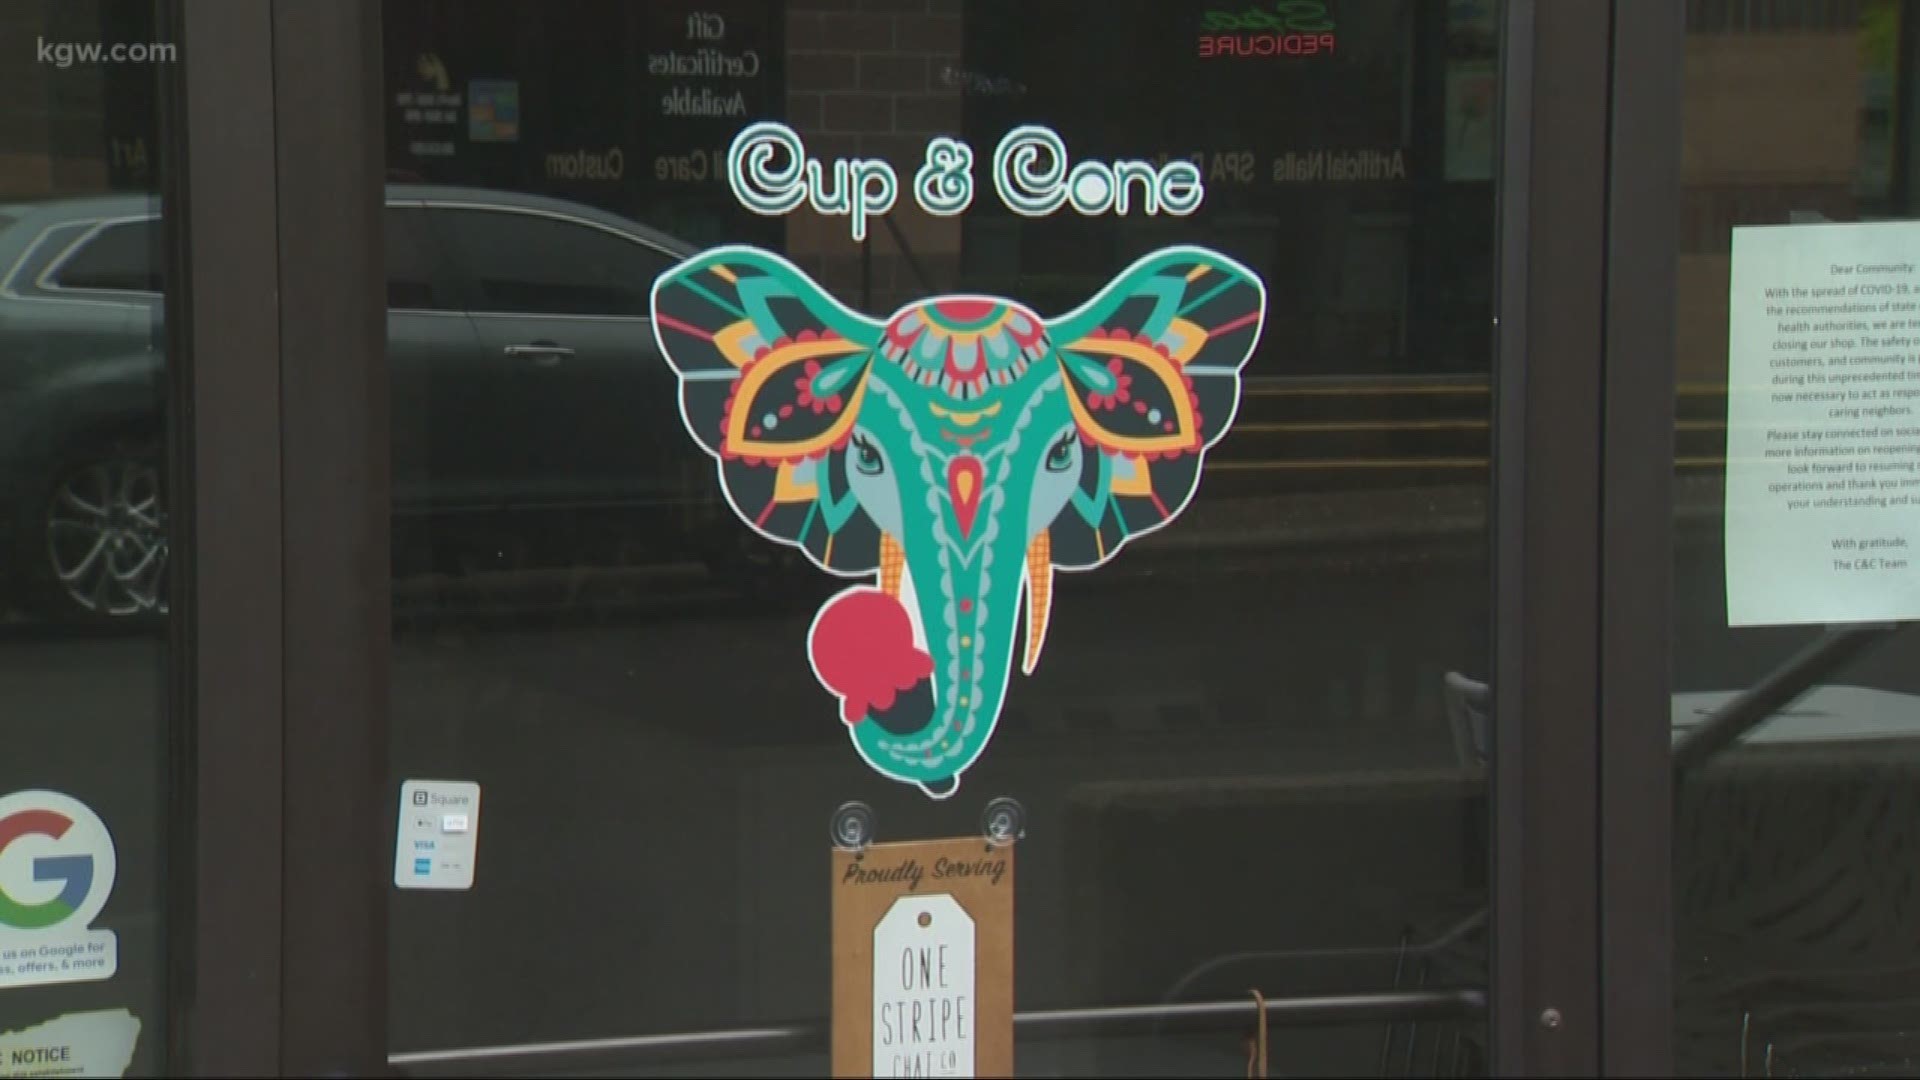 We've shared many stories of people honoring the heroes among us during this pandemic. One specialty ice cream shop, Cup & Cone, is getting into the action.